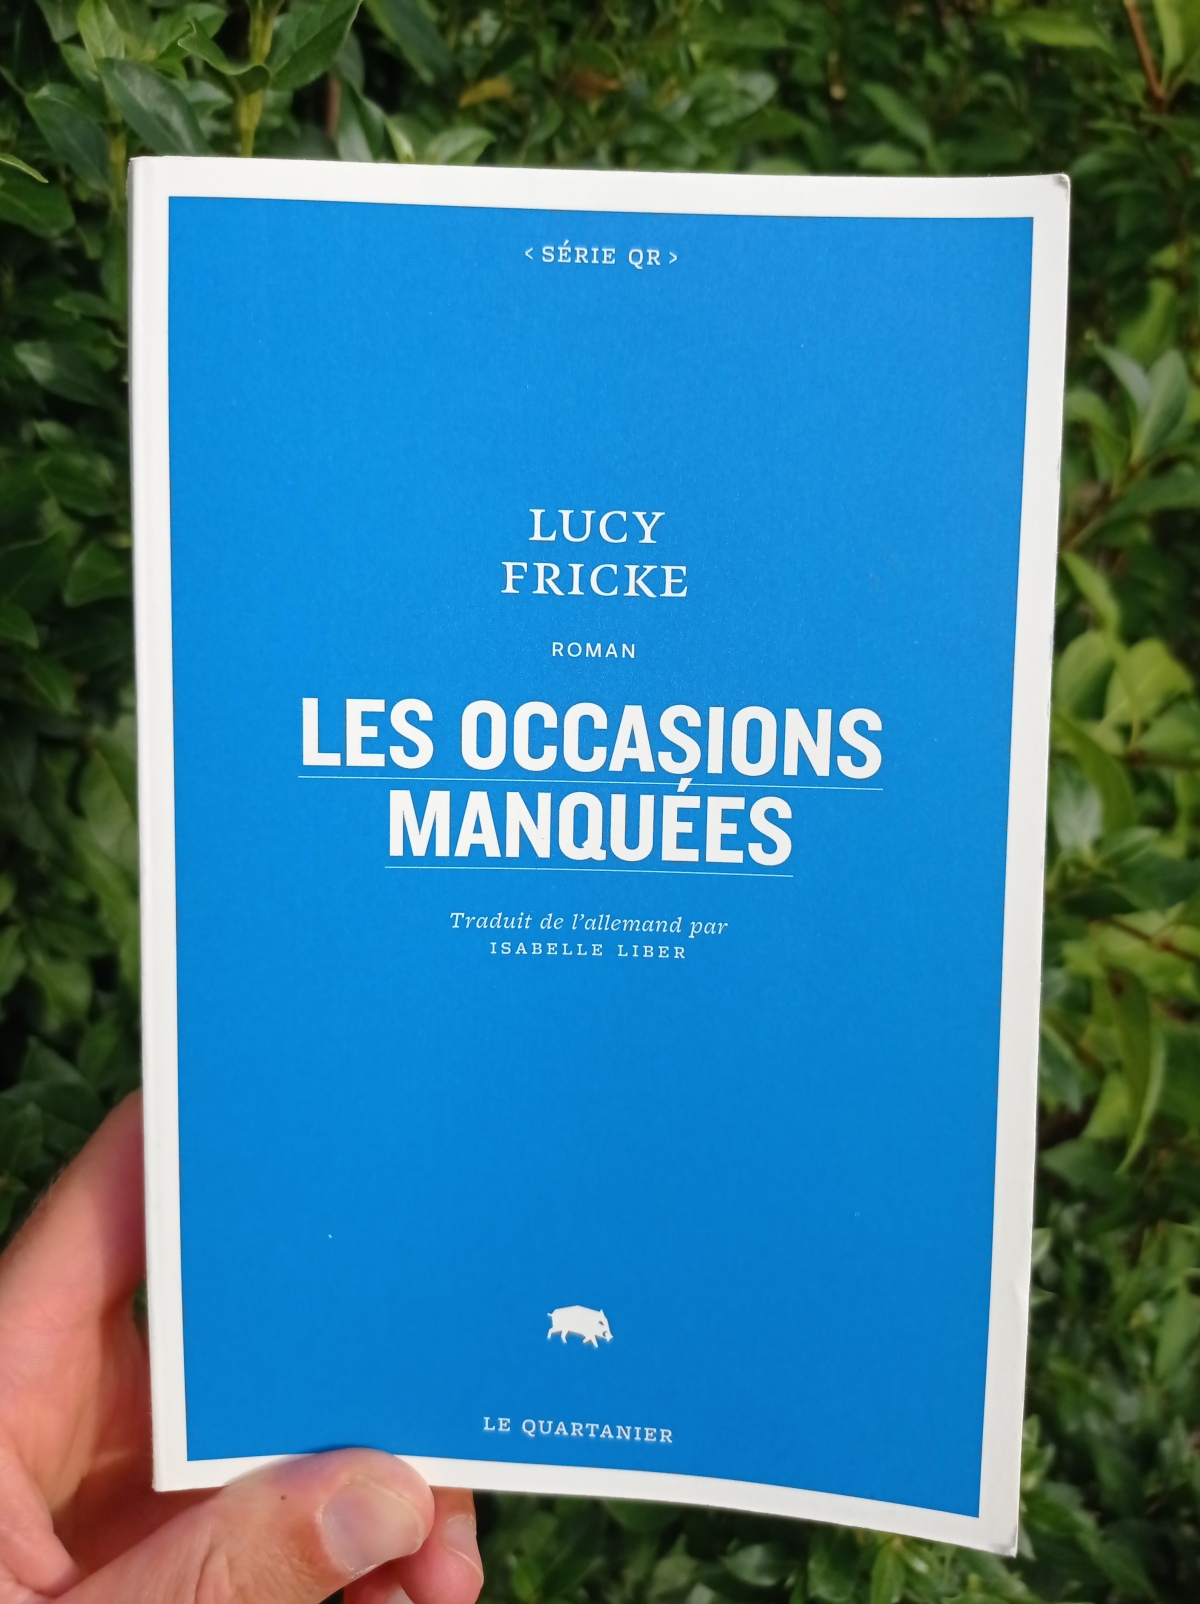 Les occasions manquées / Lucy Fricke